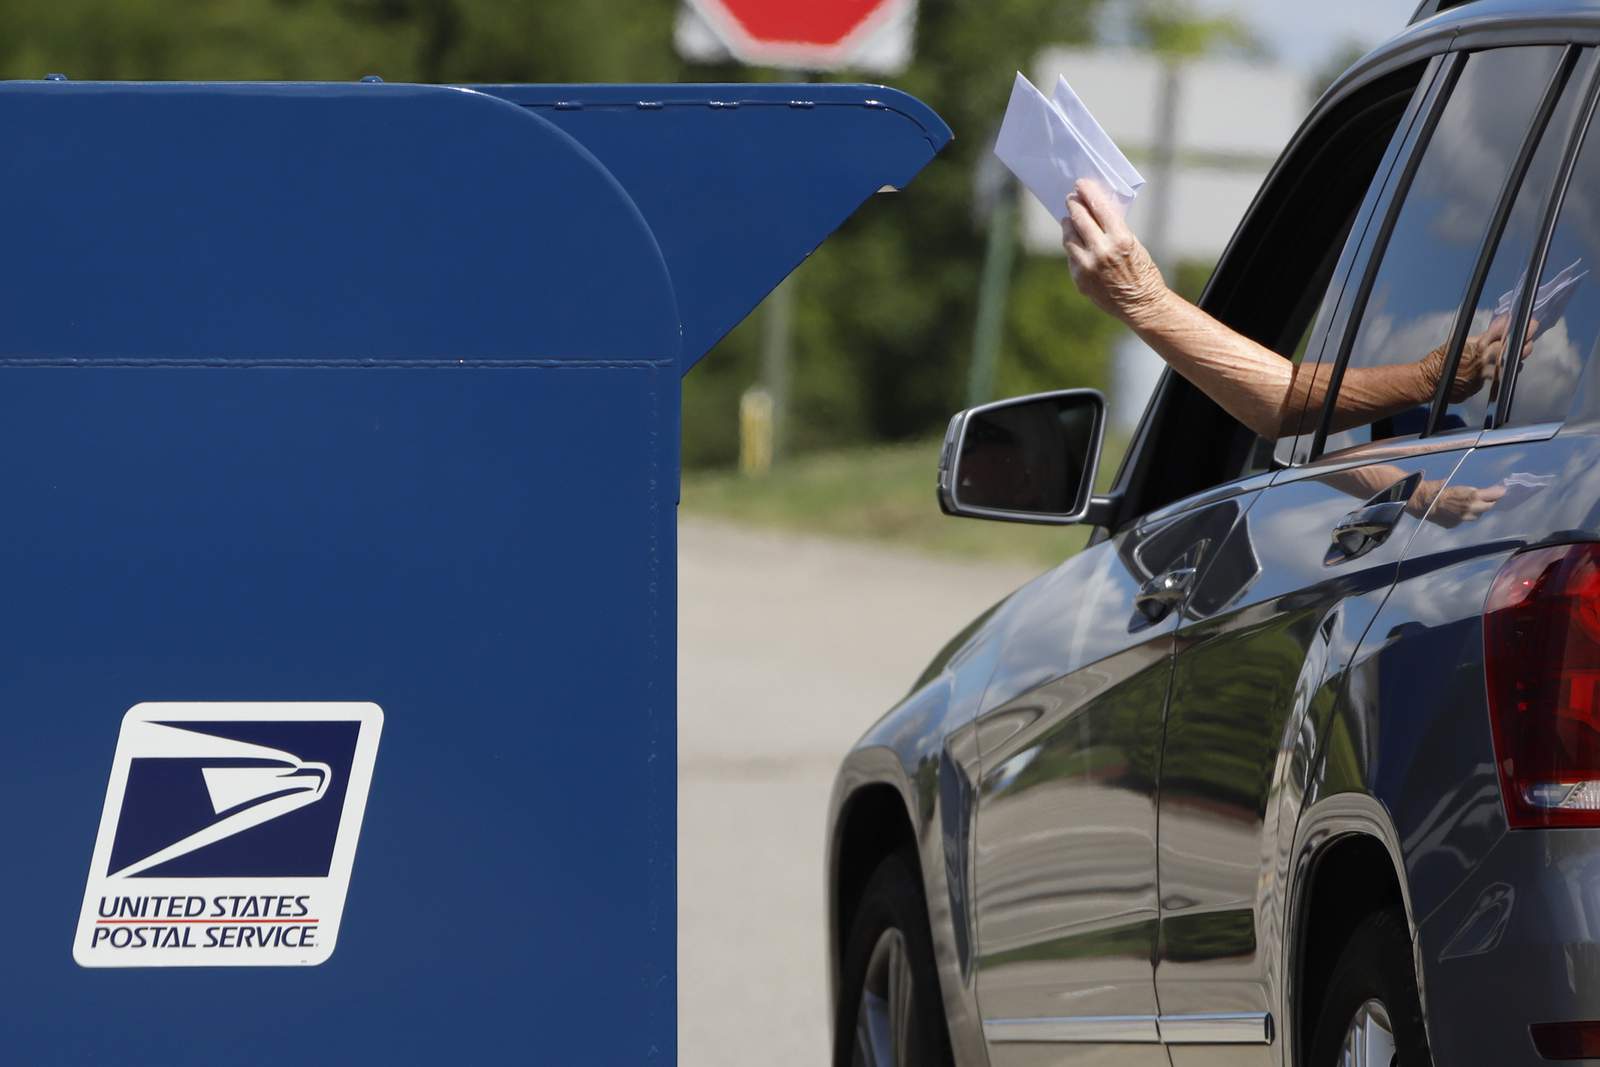 TRACK DELAYS: Here’s how to find out if mail is being delivered on time where you live